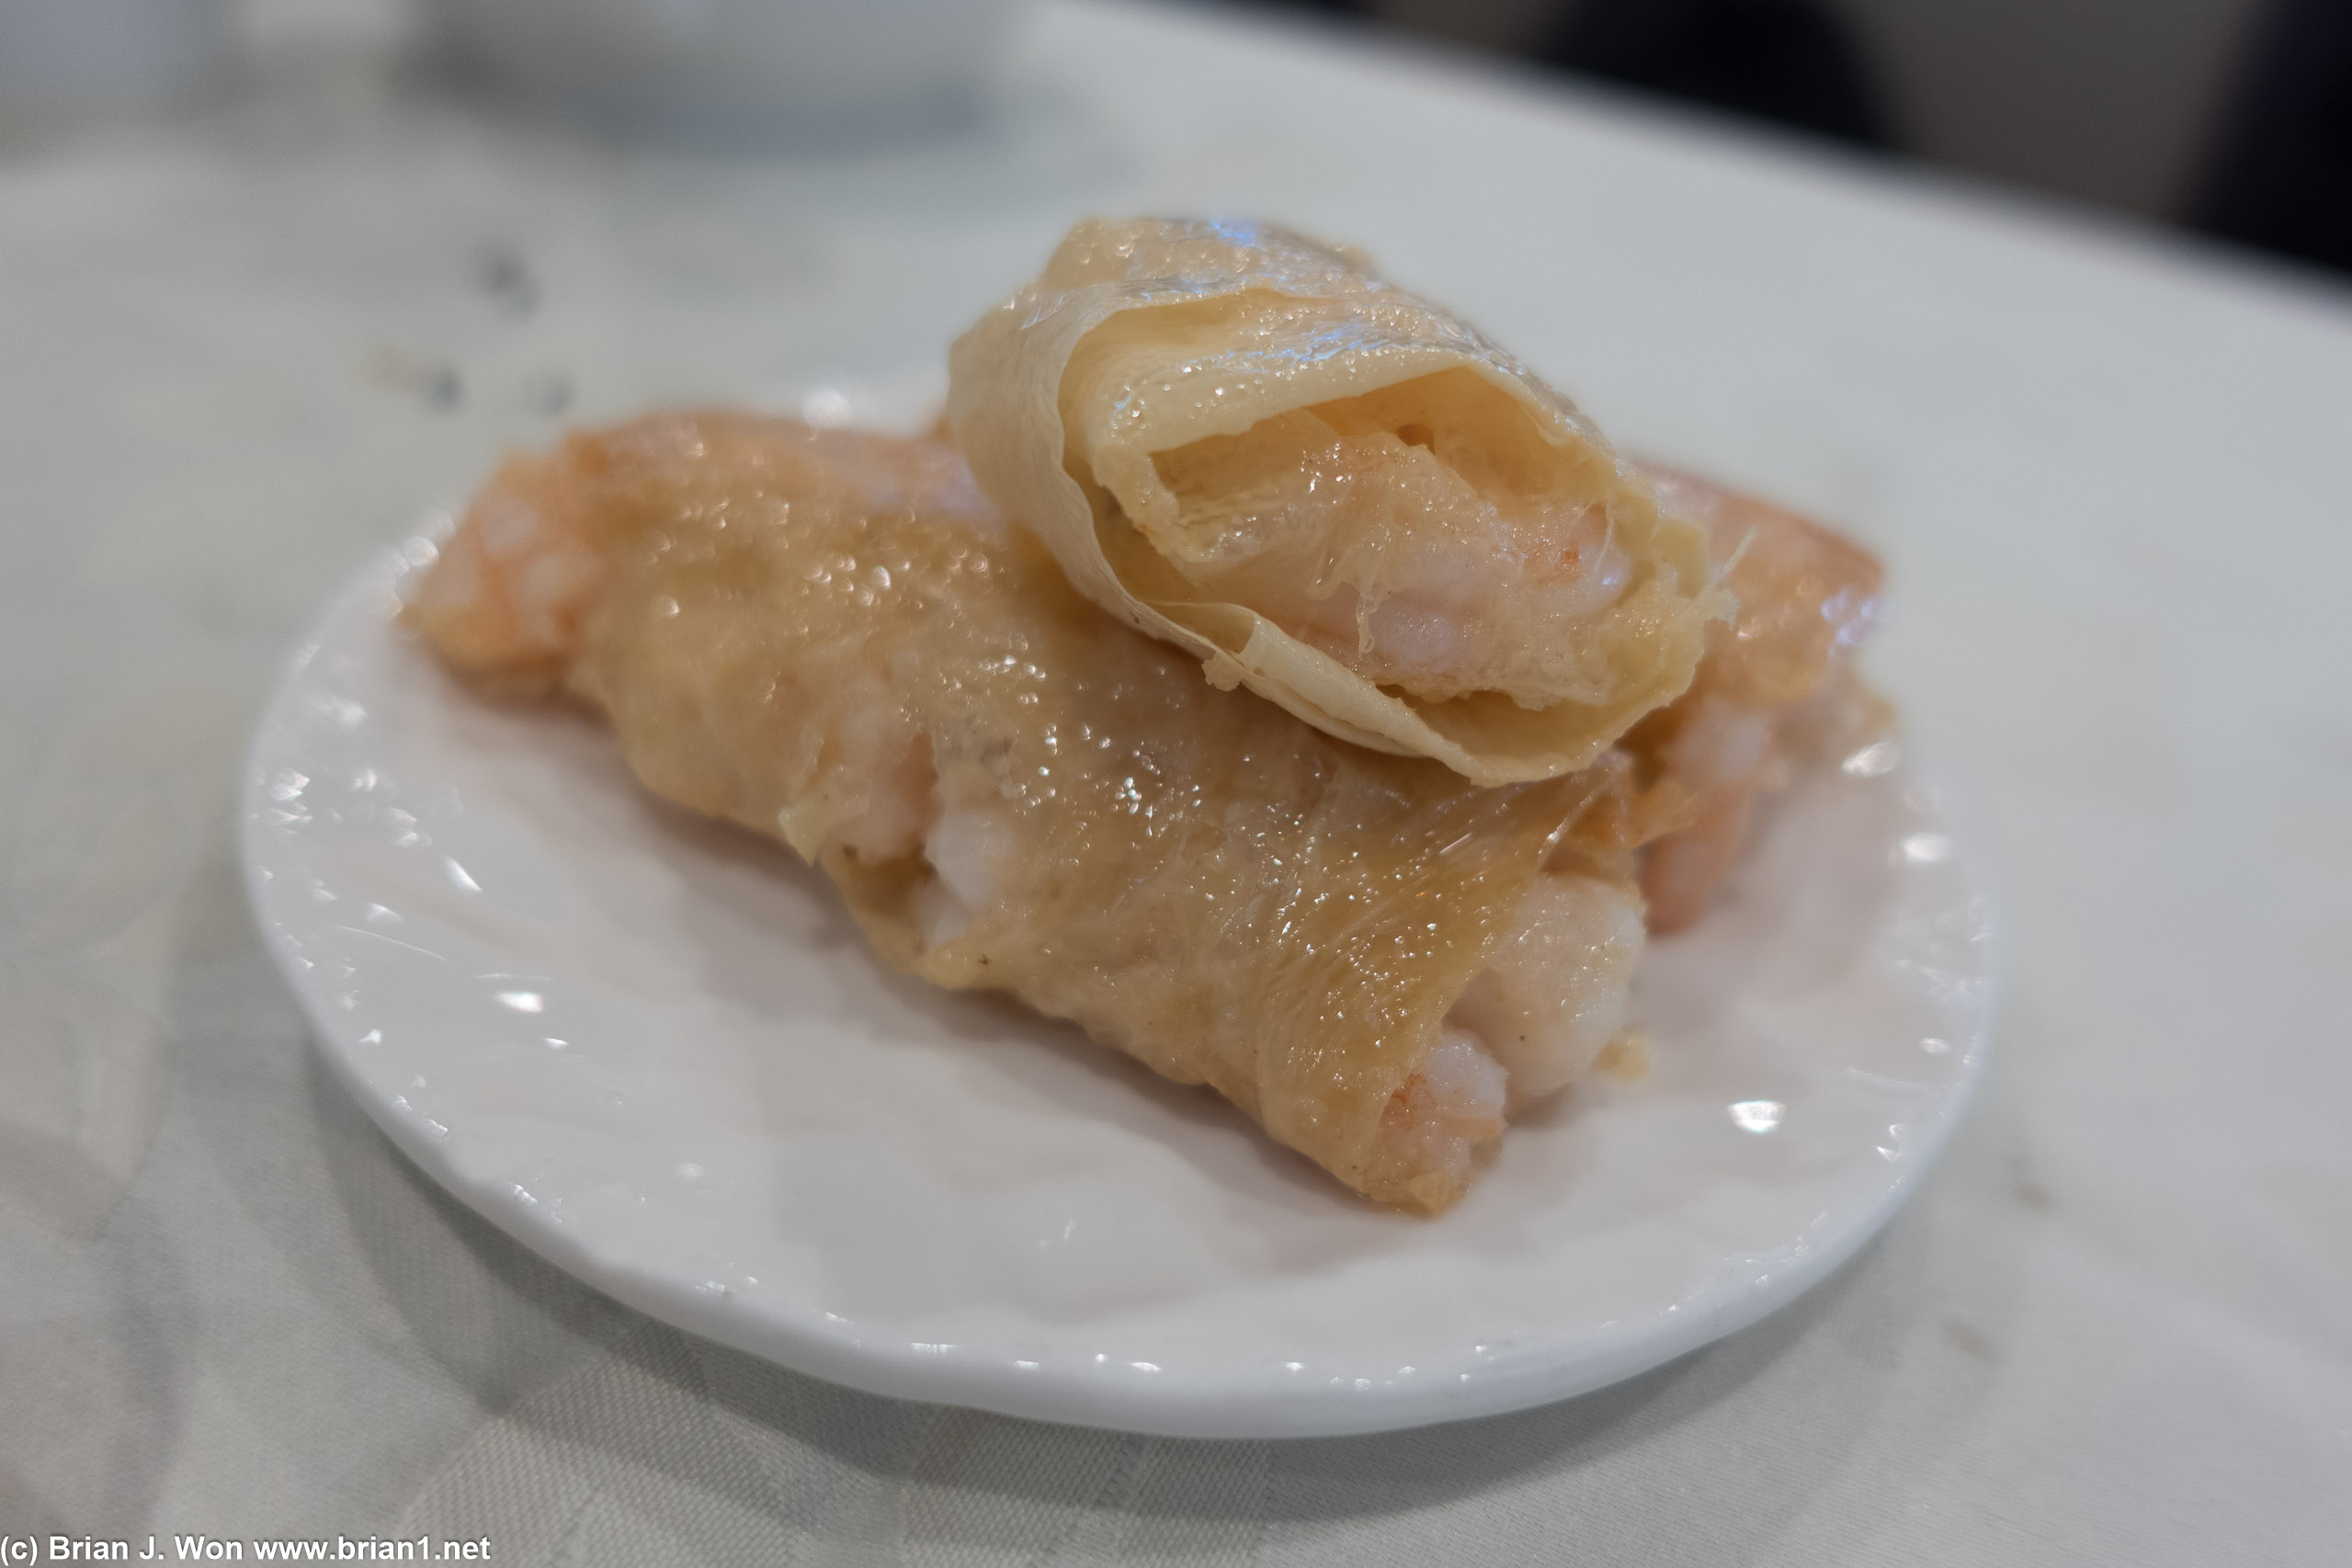 No idea what this is called. Shrimp wrapped something, served with a bit of red wine vinegar.